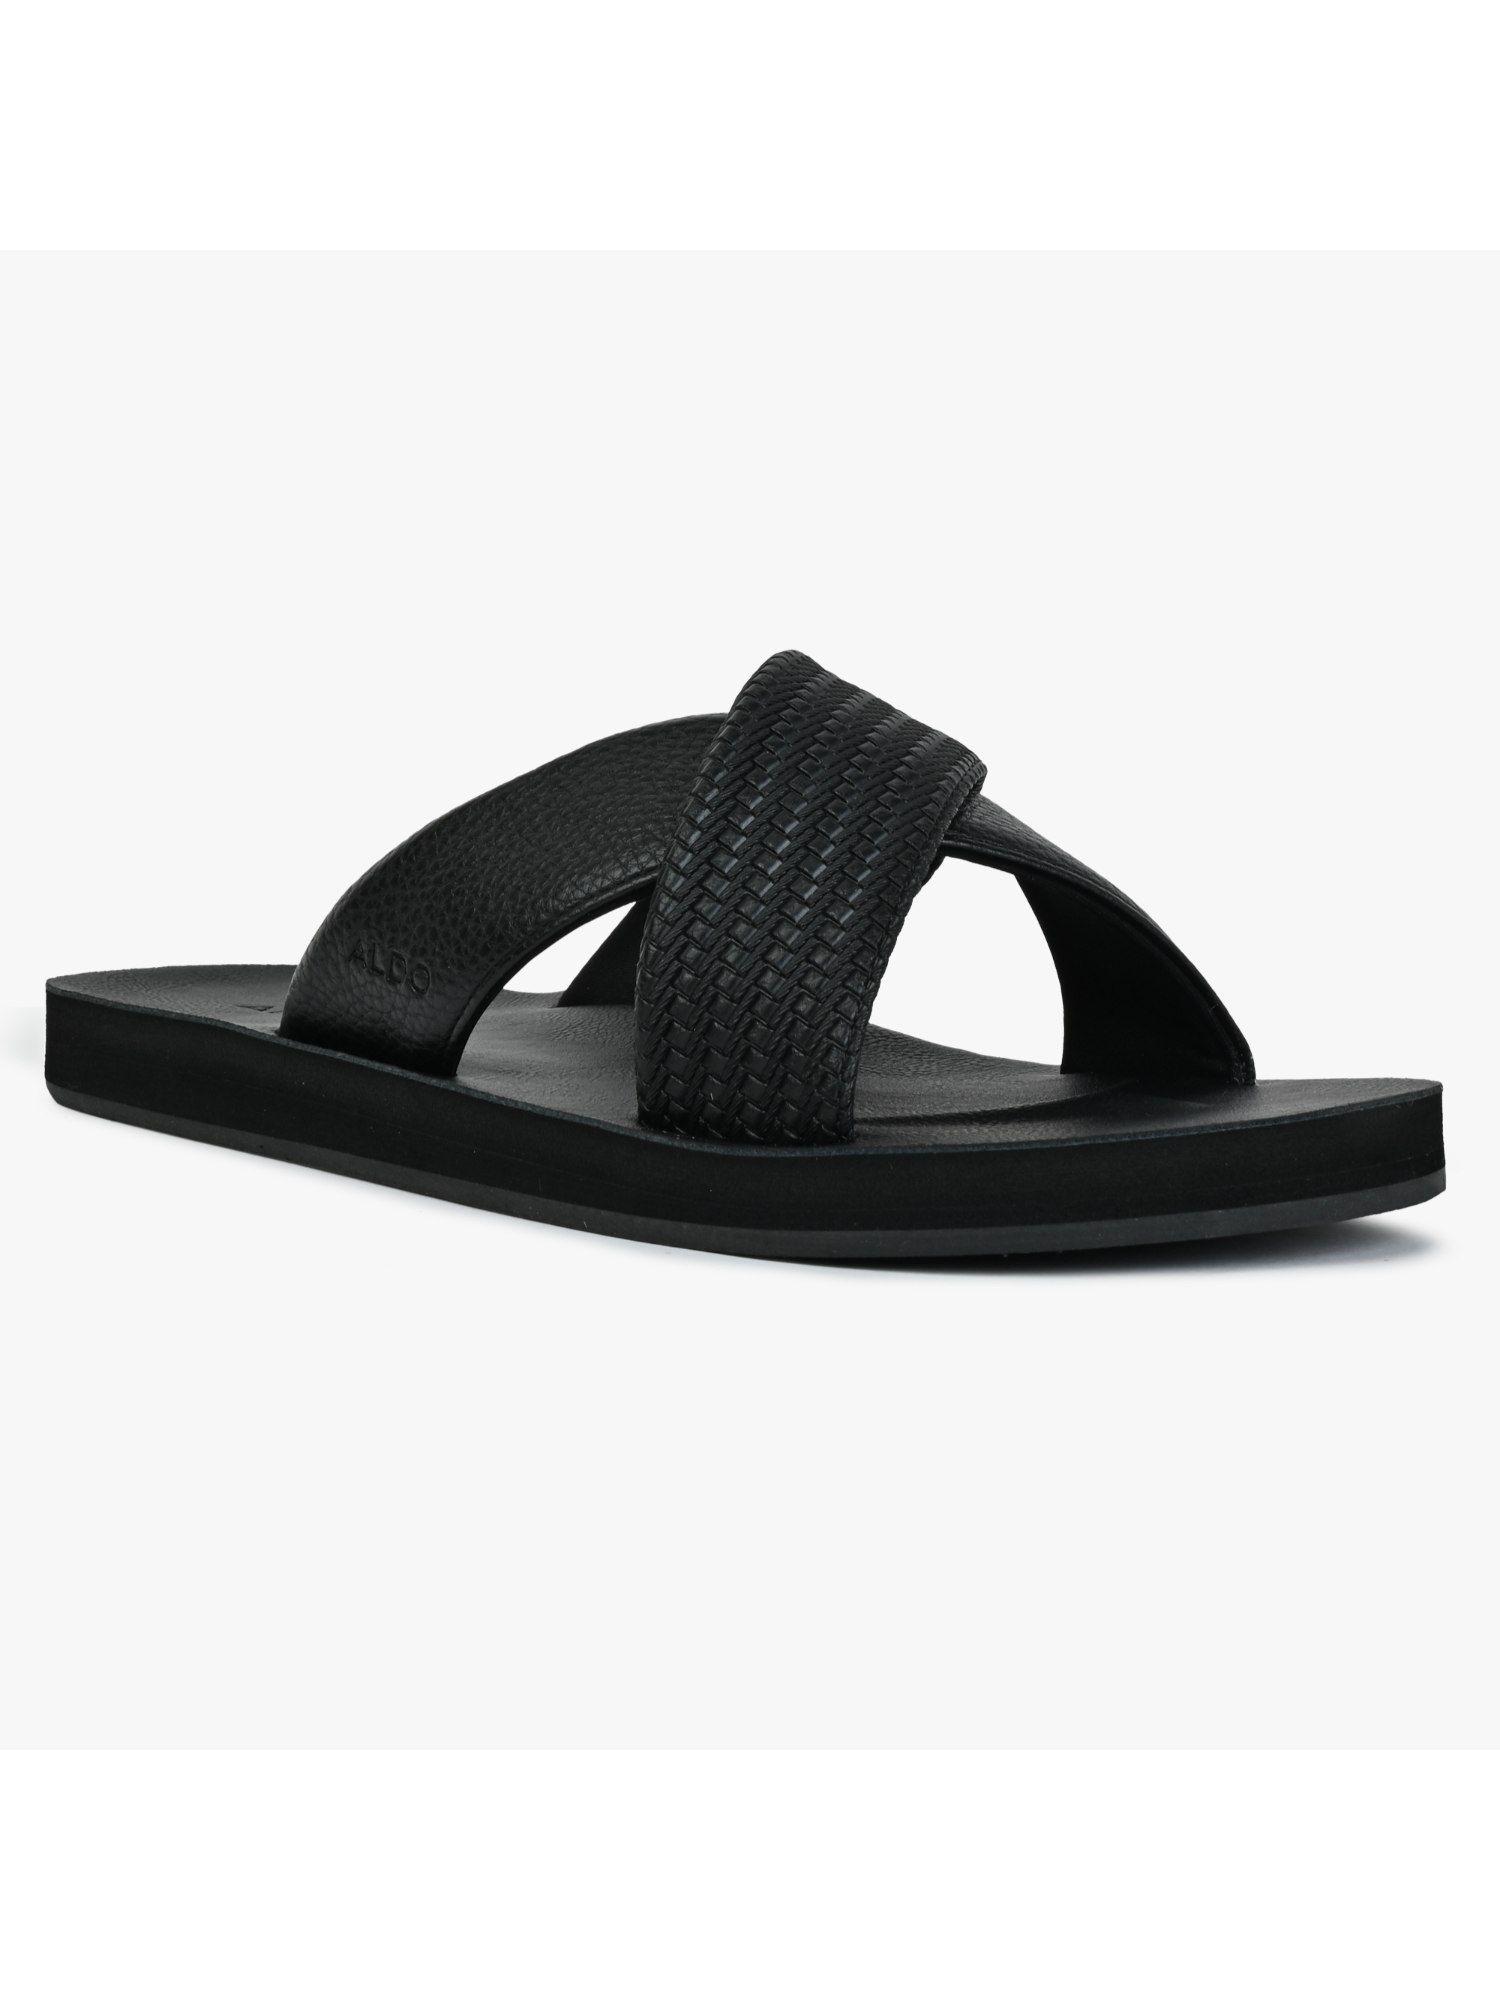 stmock007 black synthetic sandals